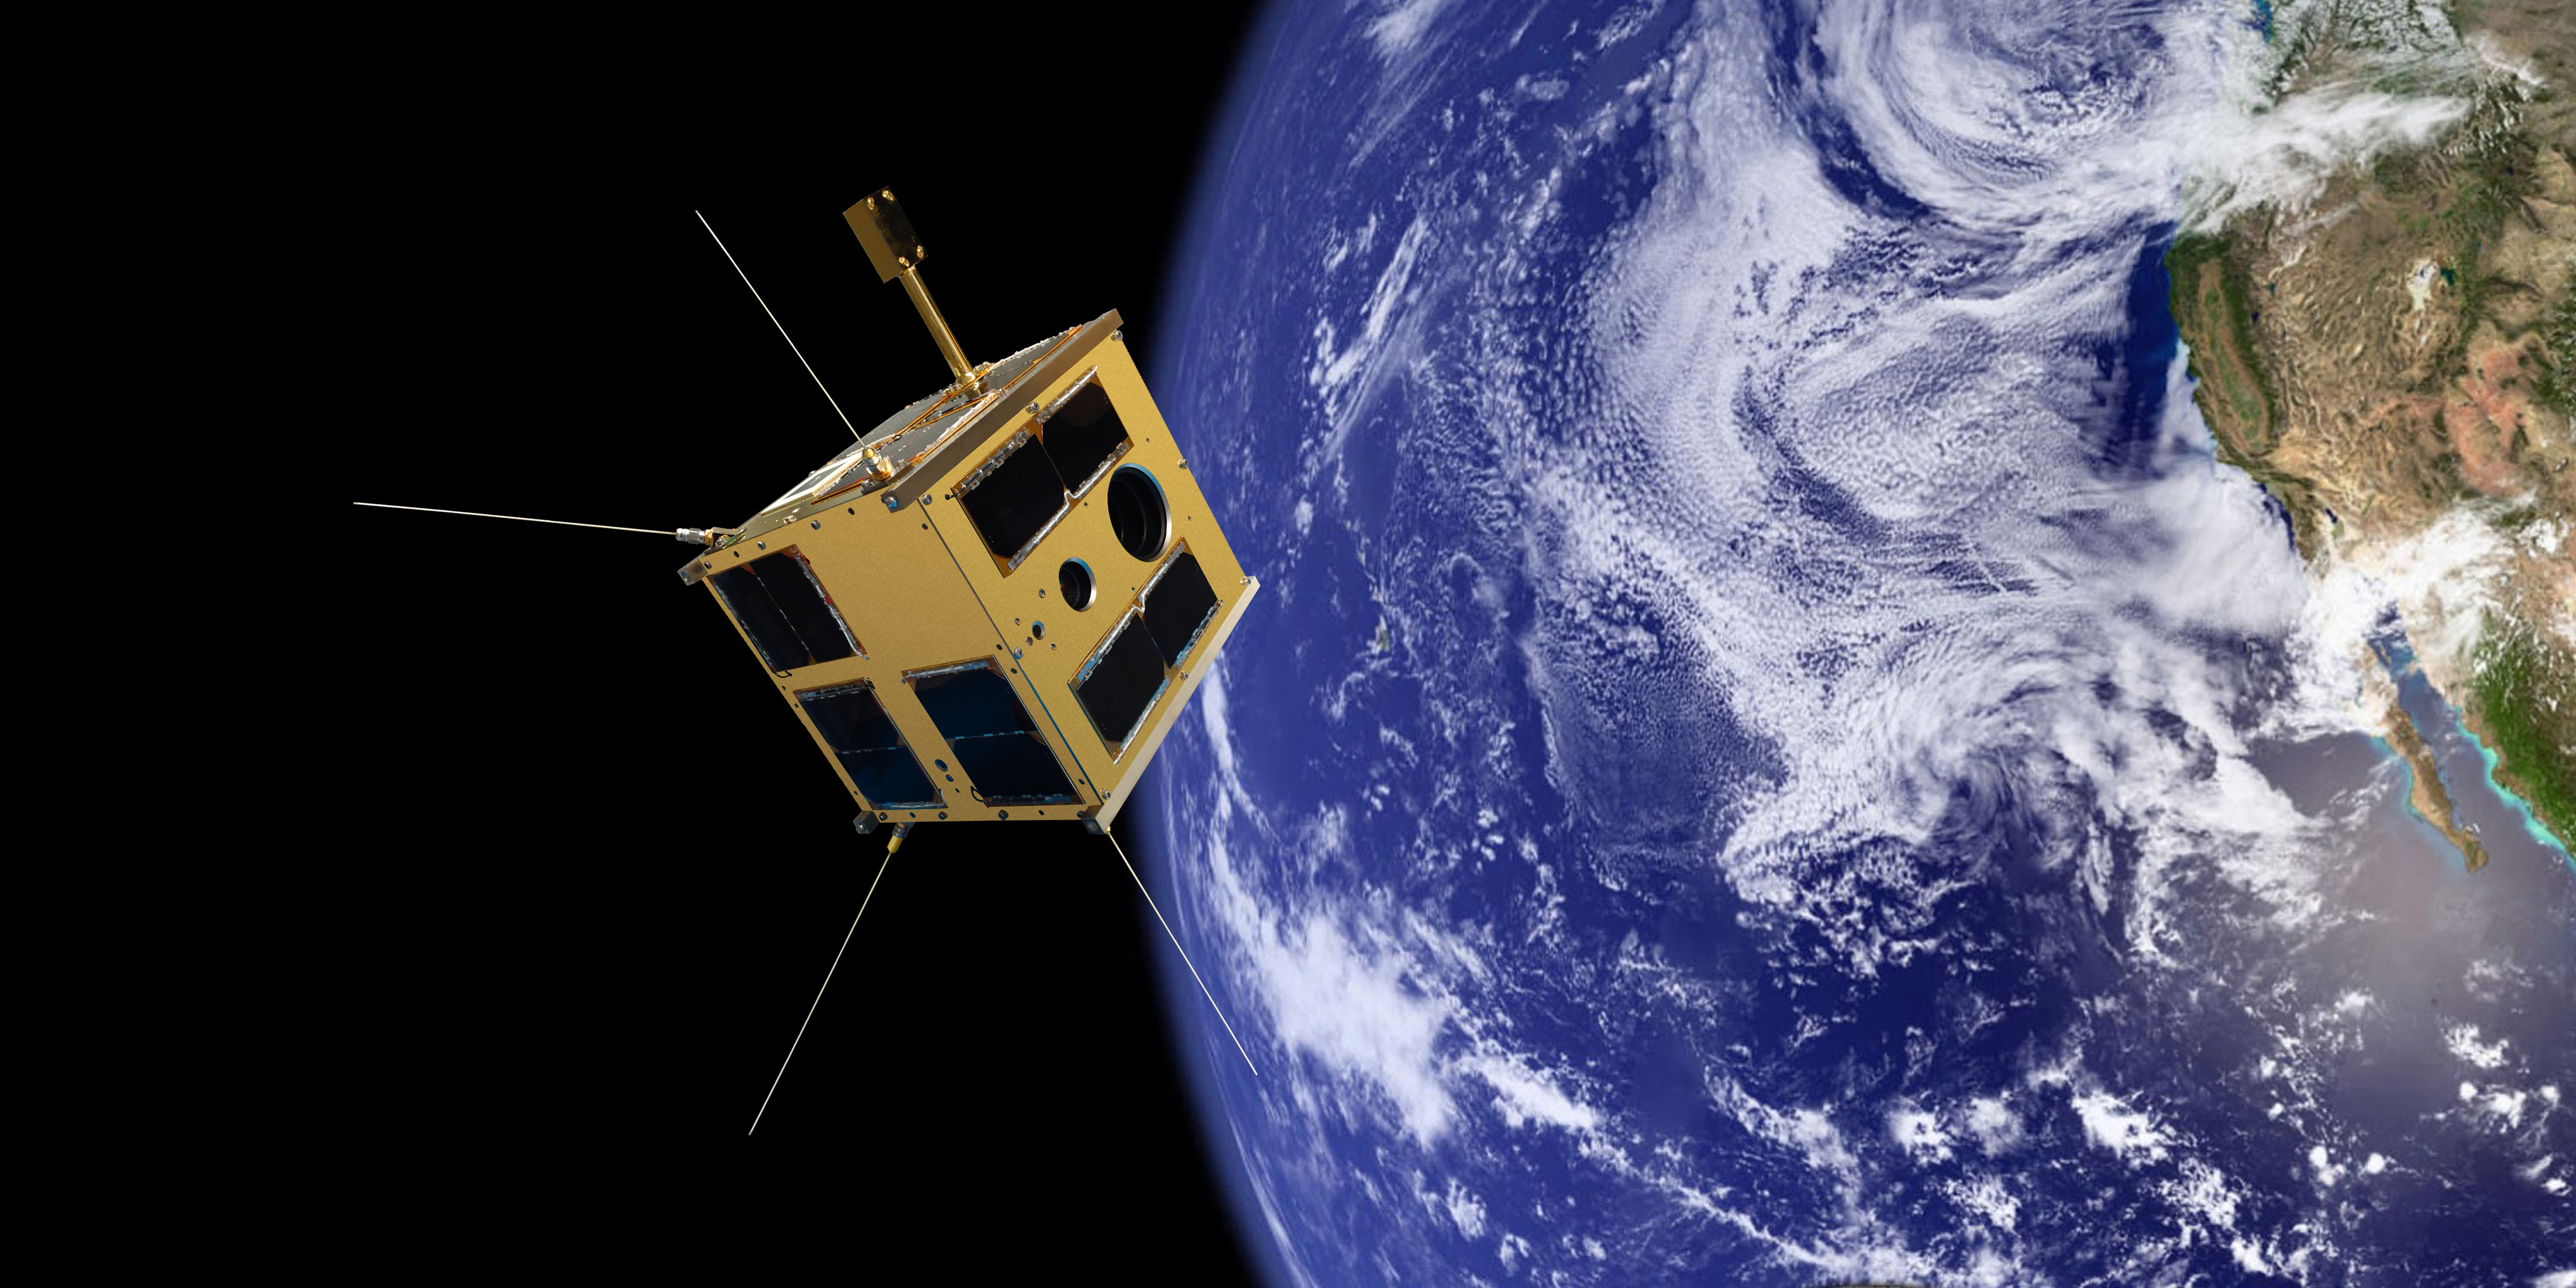 Photo composition showing the TUGSAT-1 satellite orbiting the earth.